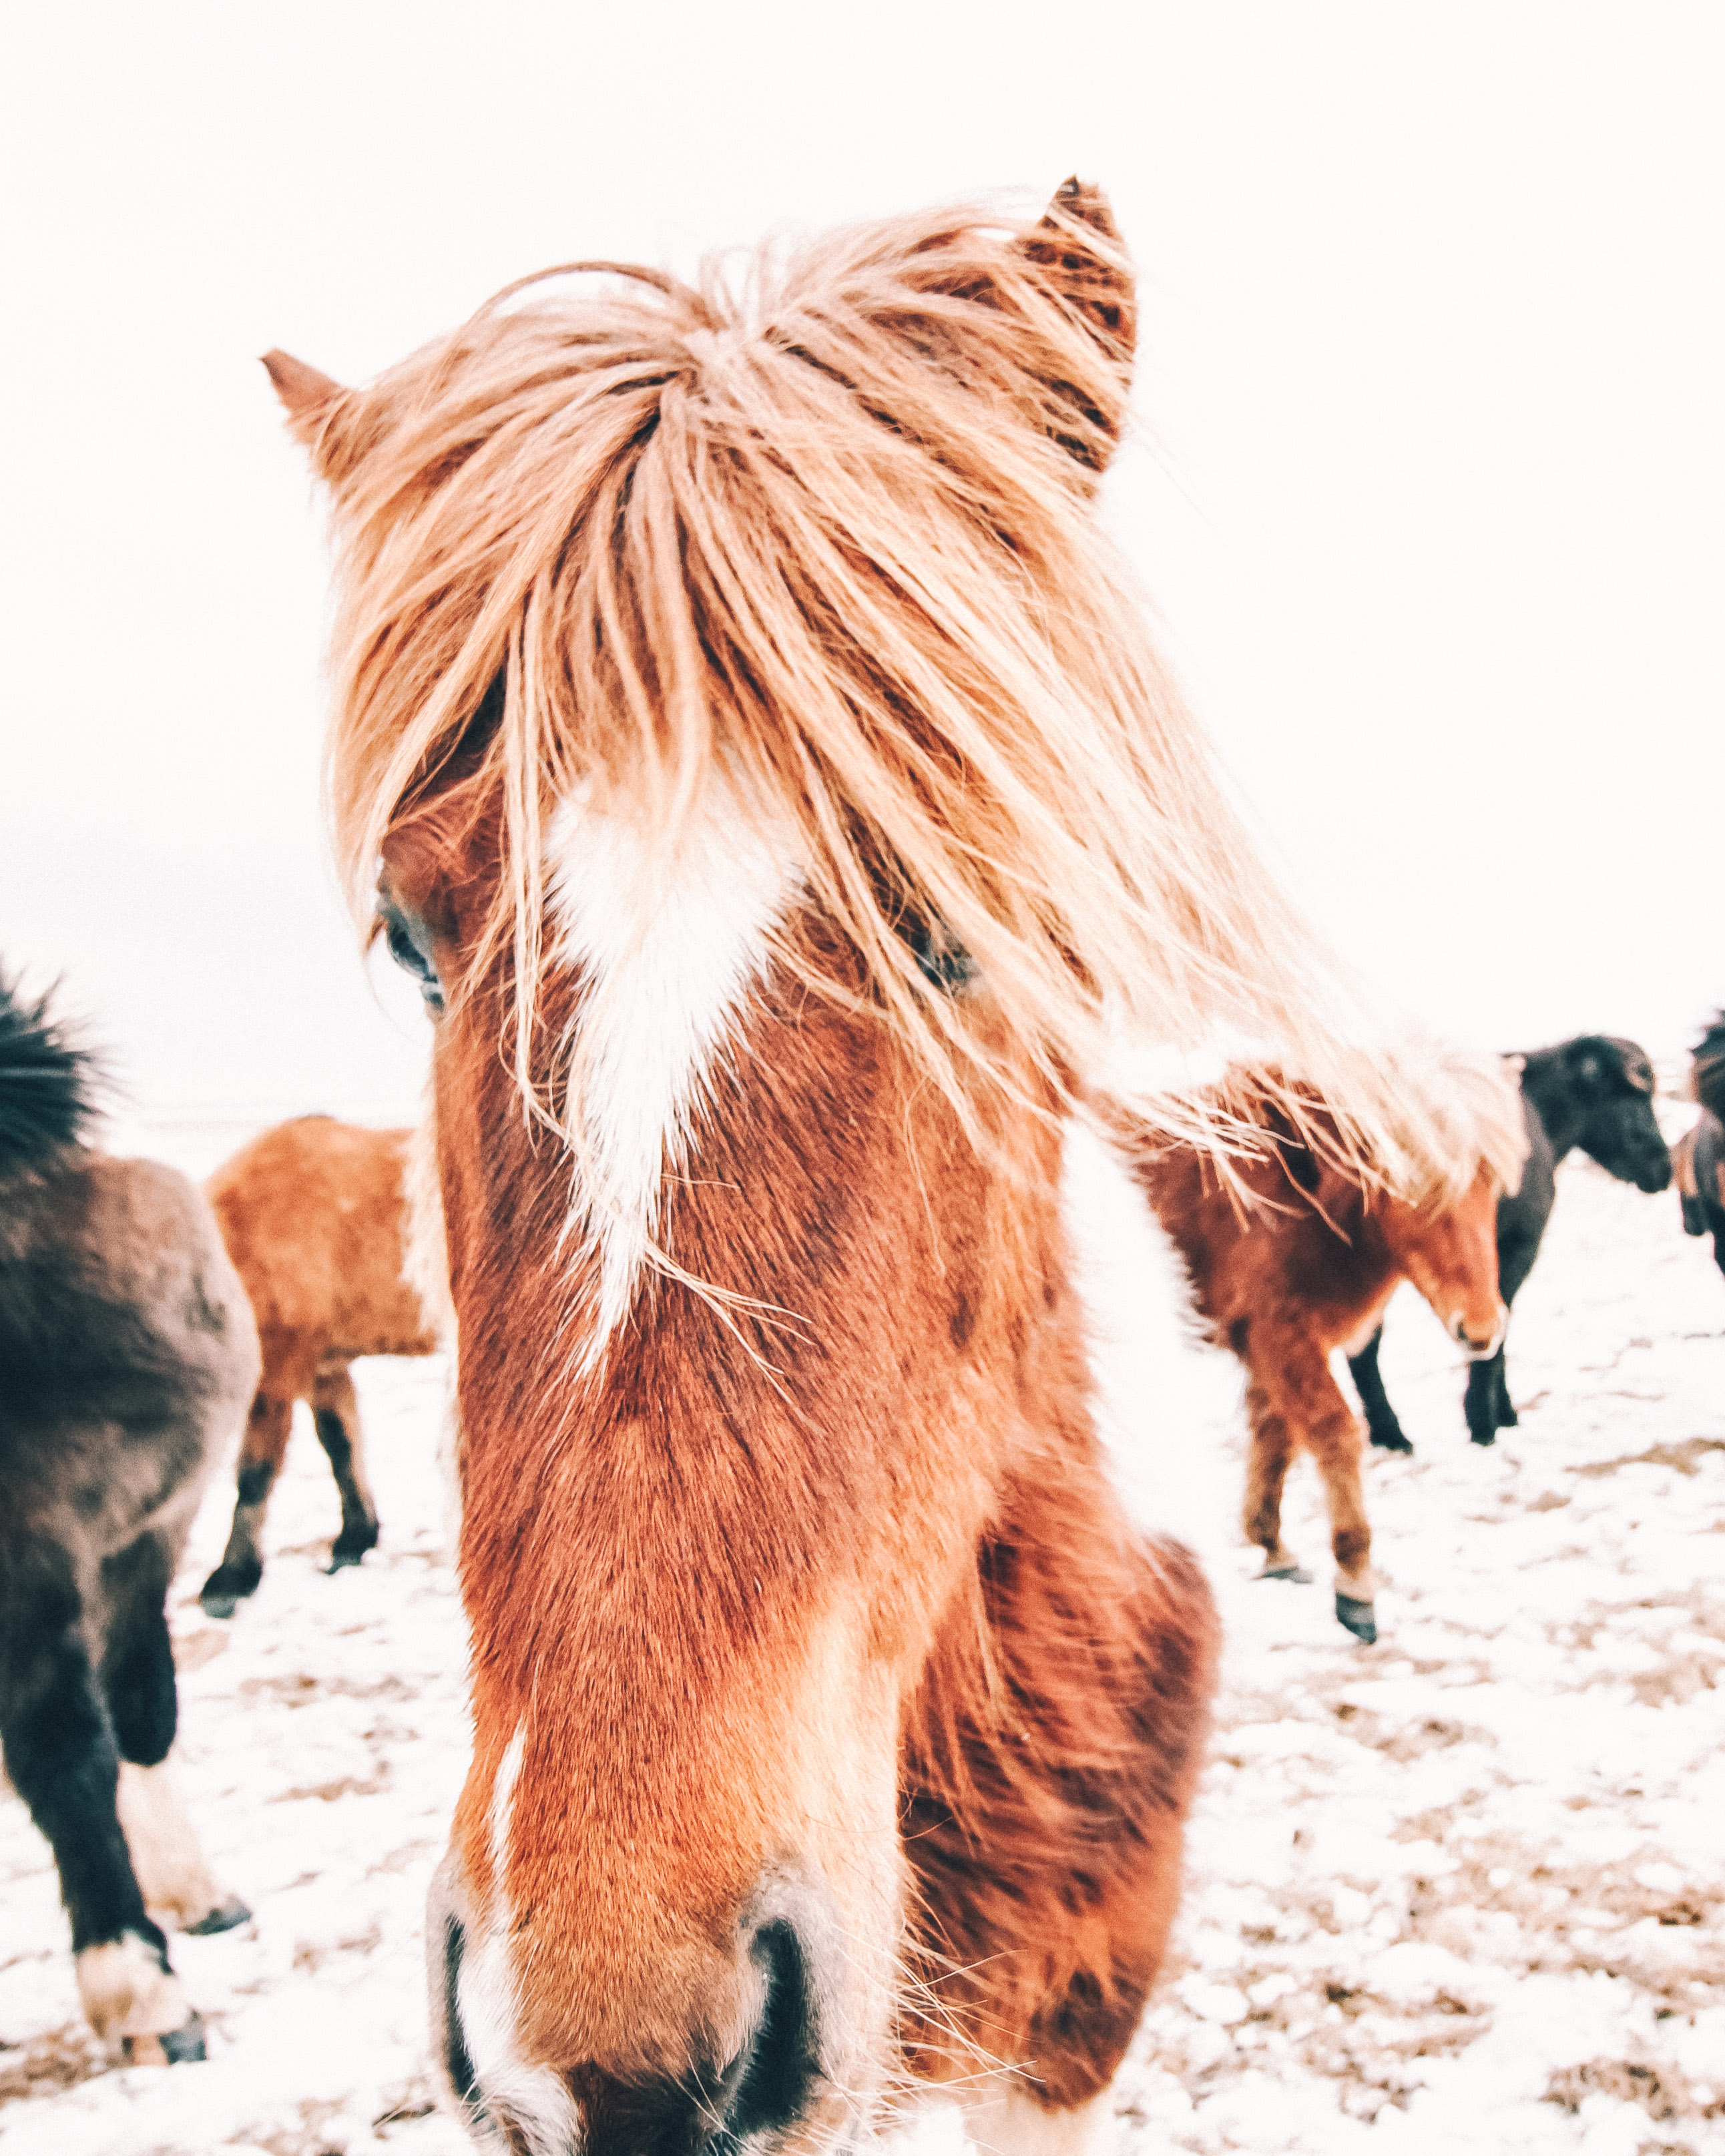 Caramel coloured Icelandic horse in the snow